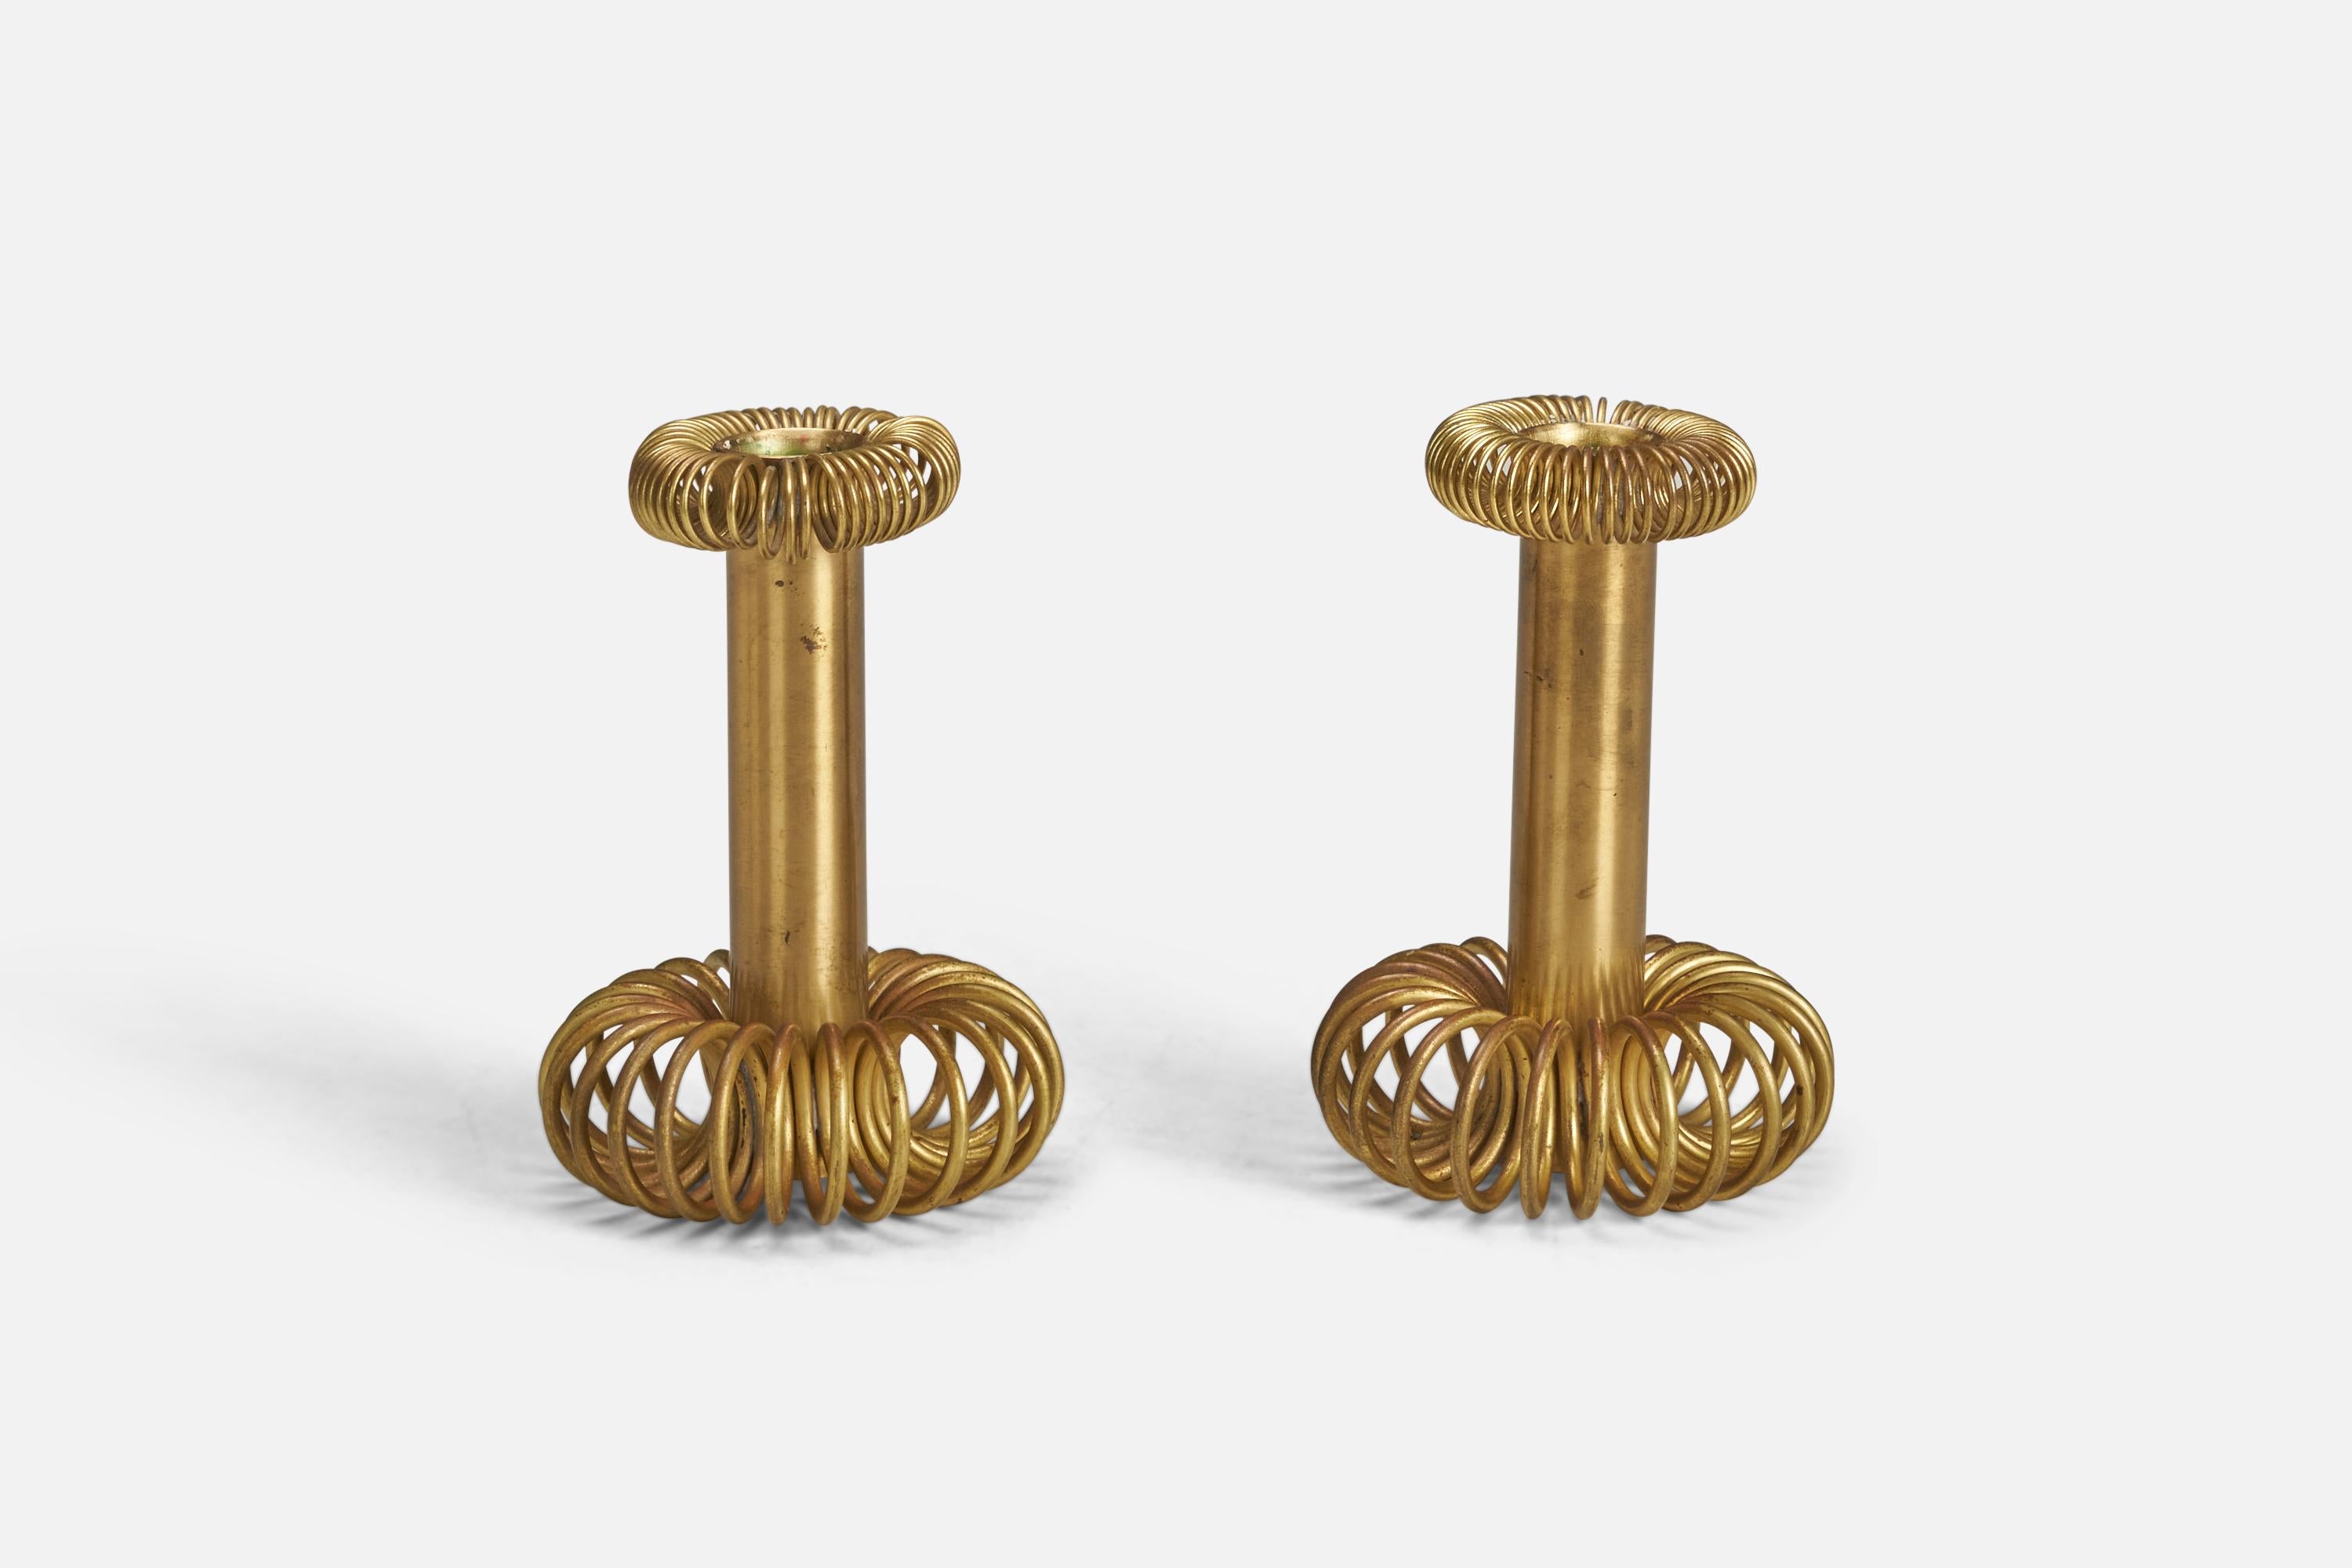 A pair of brass candlesticks designed and produced by a Swedish Designer, Sweden, 1940s.